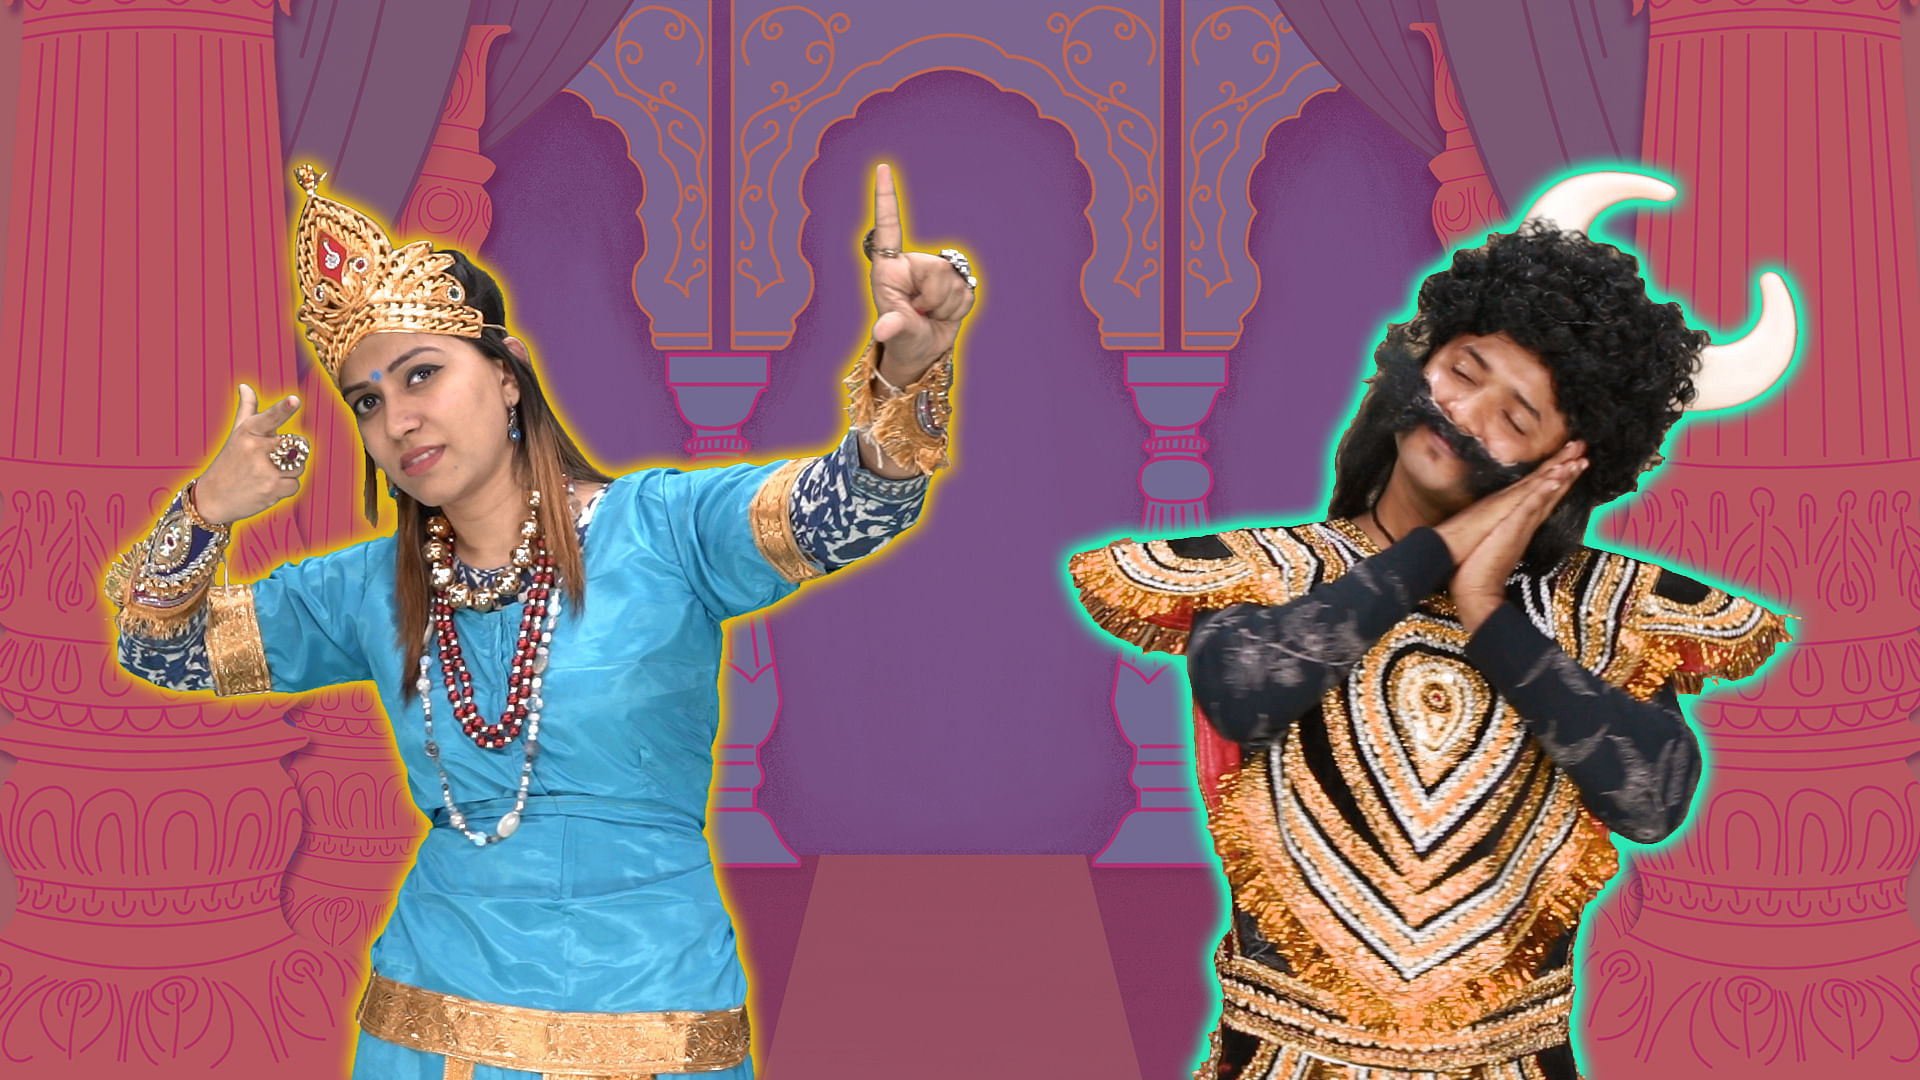 Untold stories of Ramayan explored in sign language by hearing impaired actors.